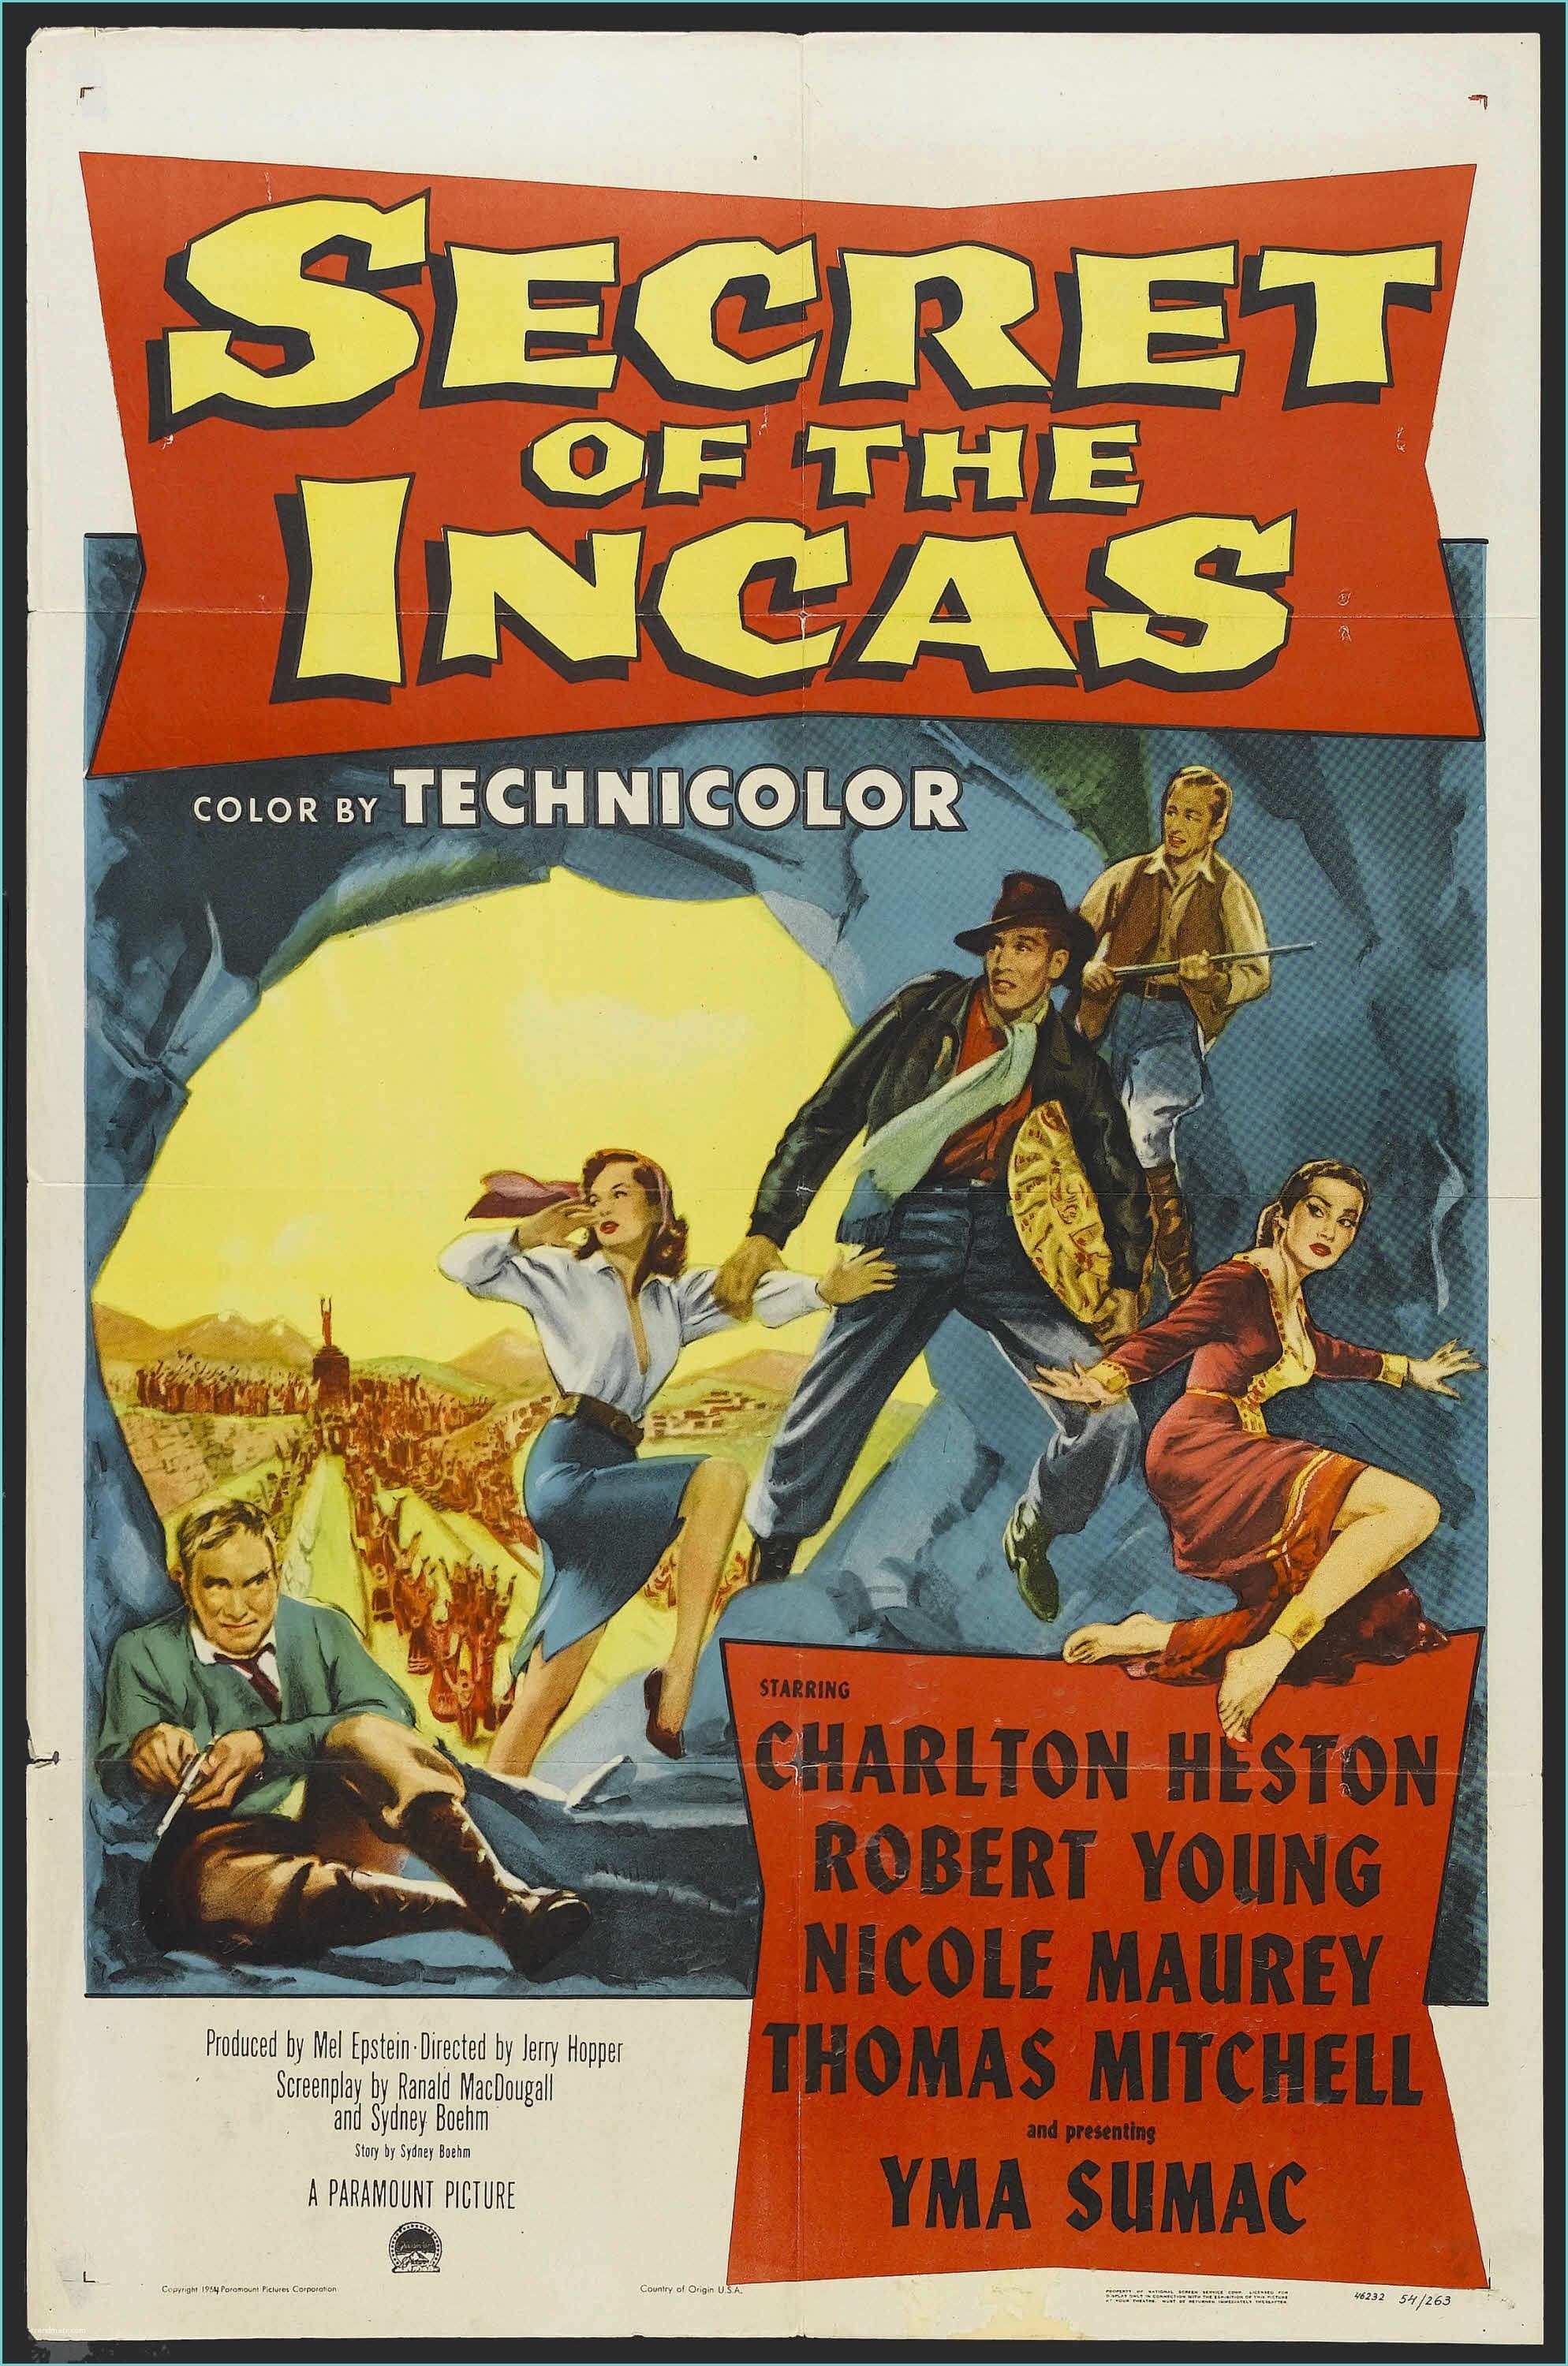 Allposters Return Policy Secret Of the Incas Movie Poster High Res